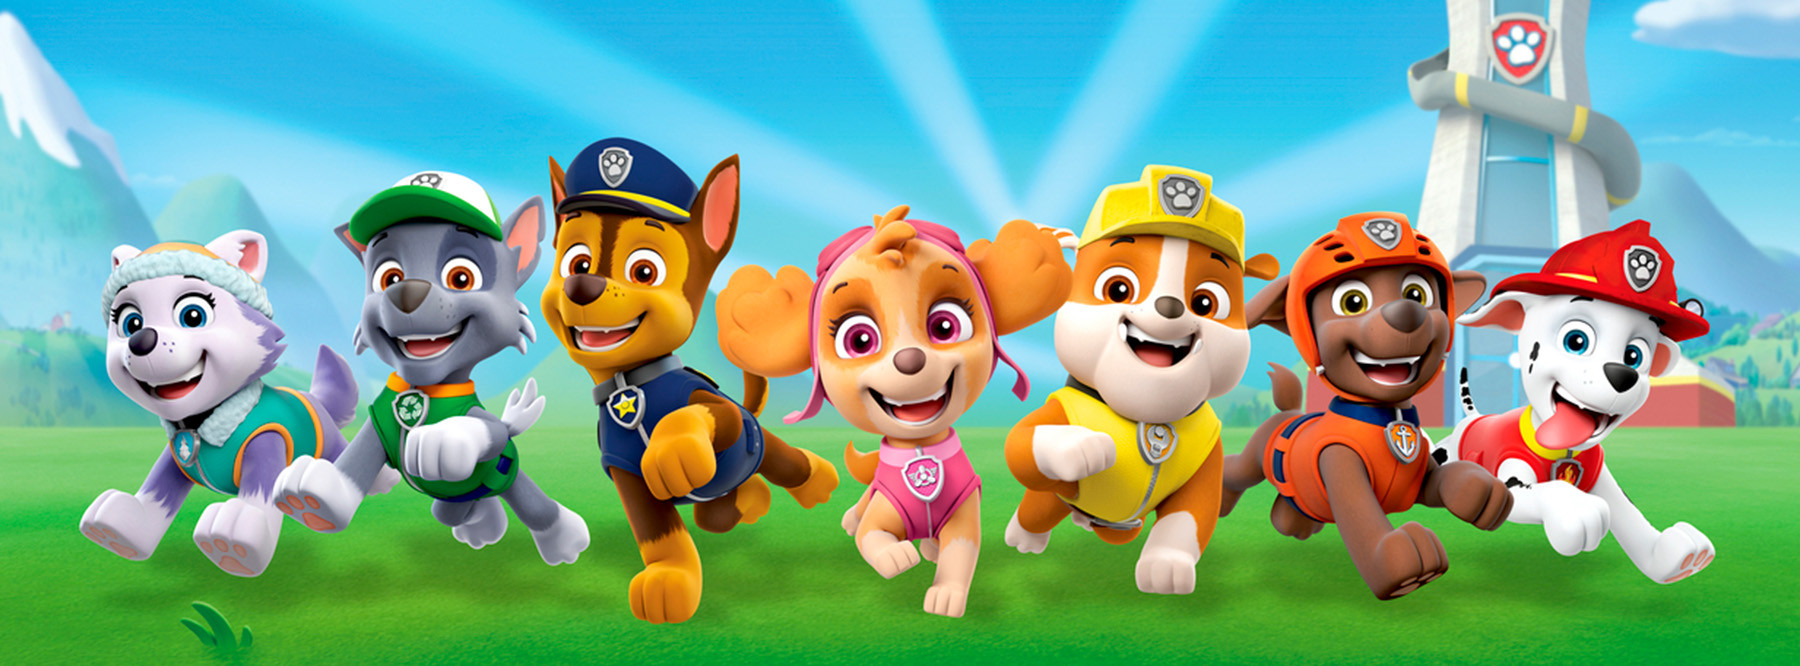 Paw Patrol to the rescue